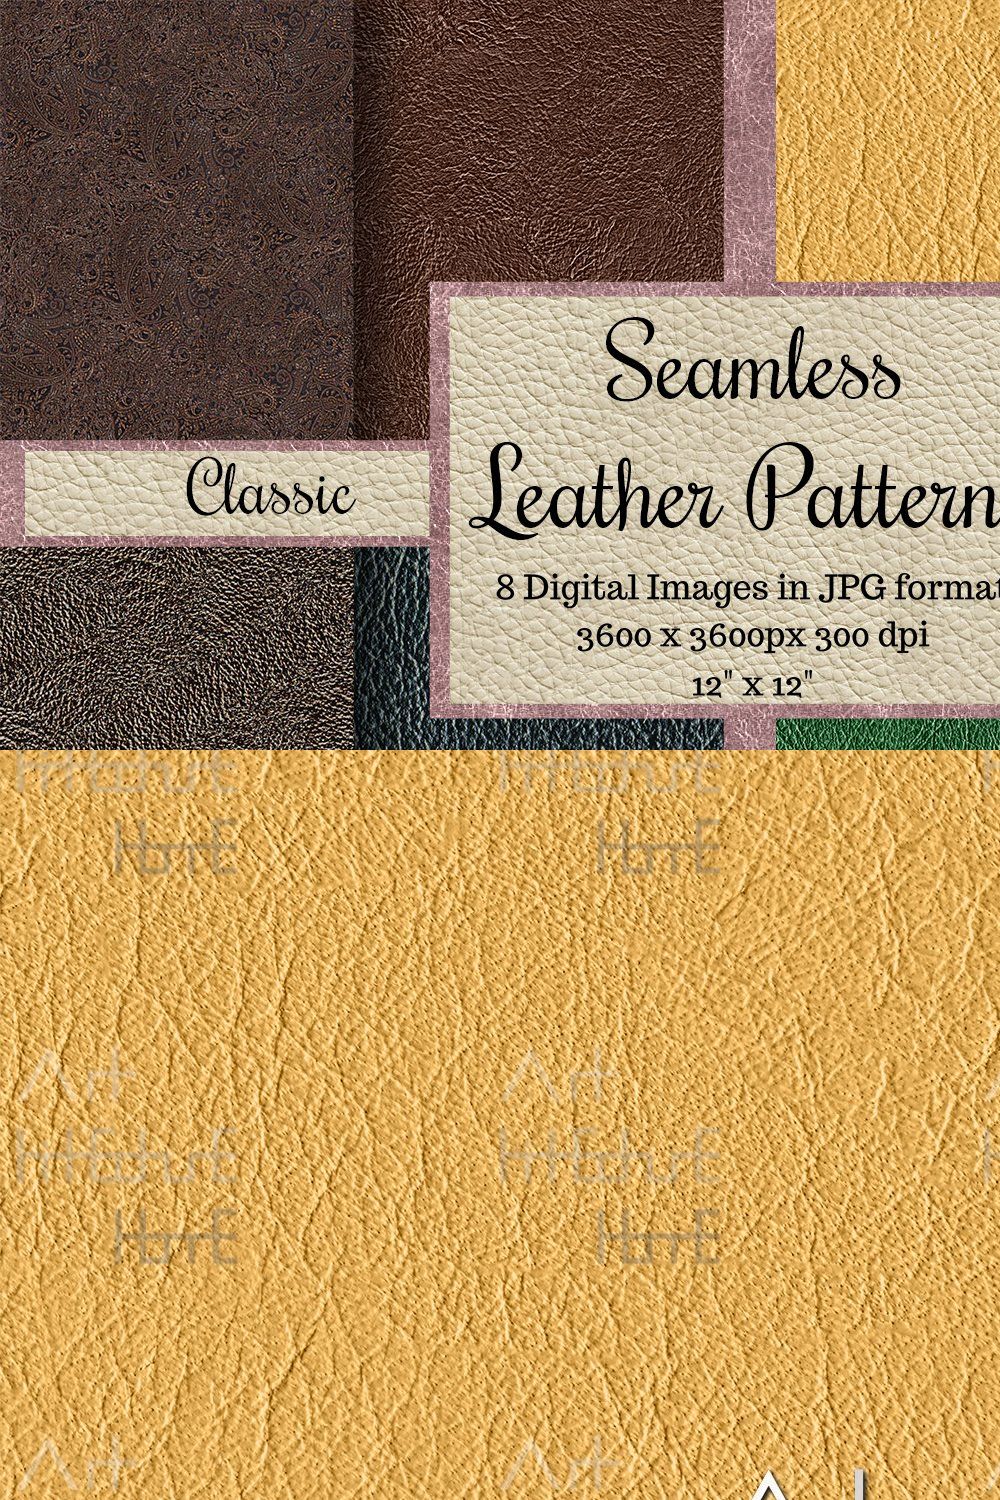 Seamless Leather Patterns - Classic pinterest preview image.